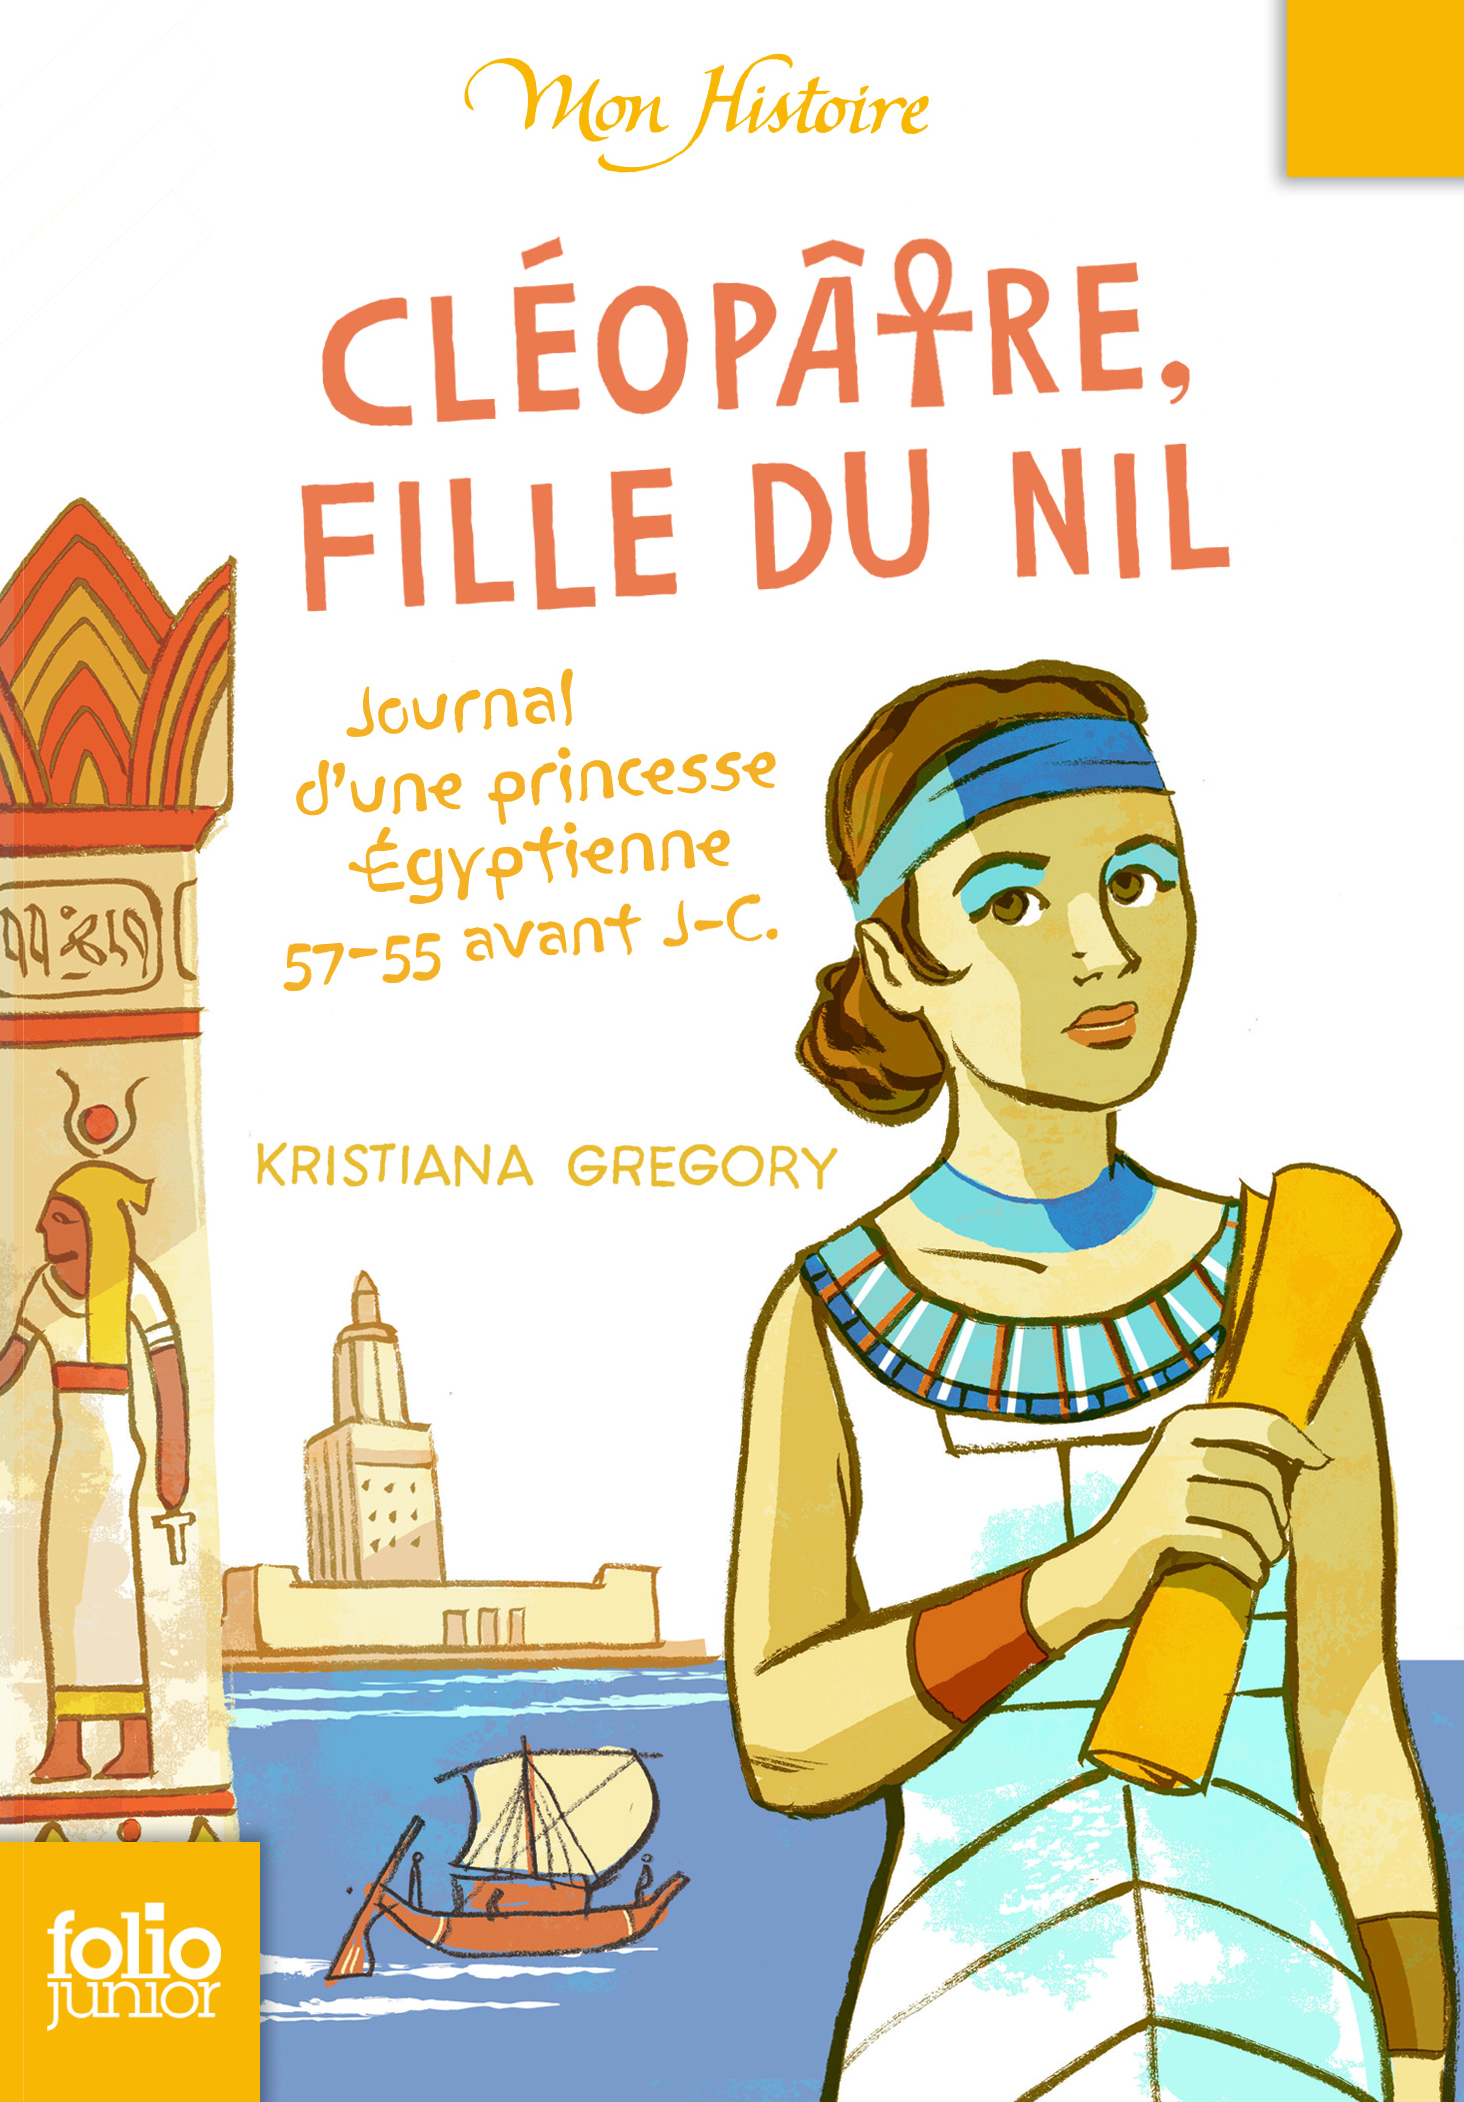 cleopatra vii daughter of the nile